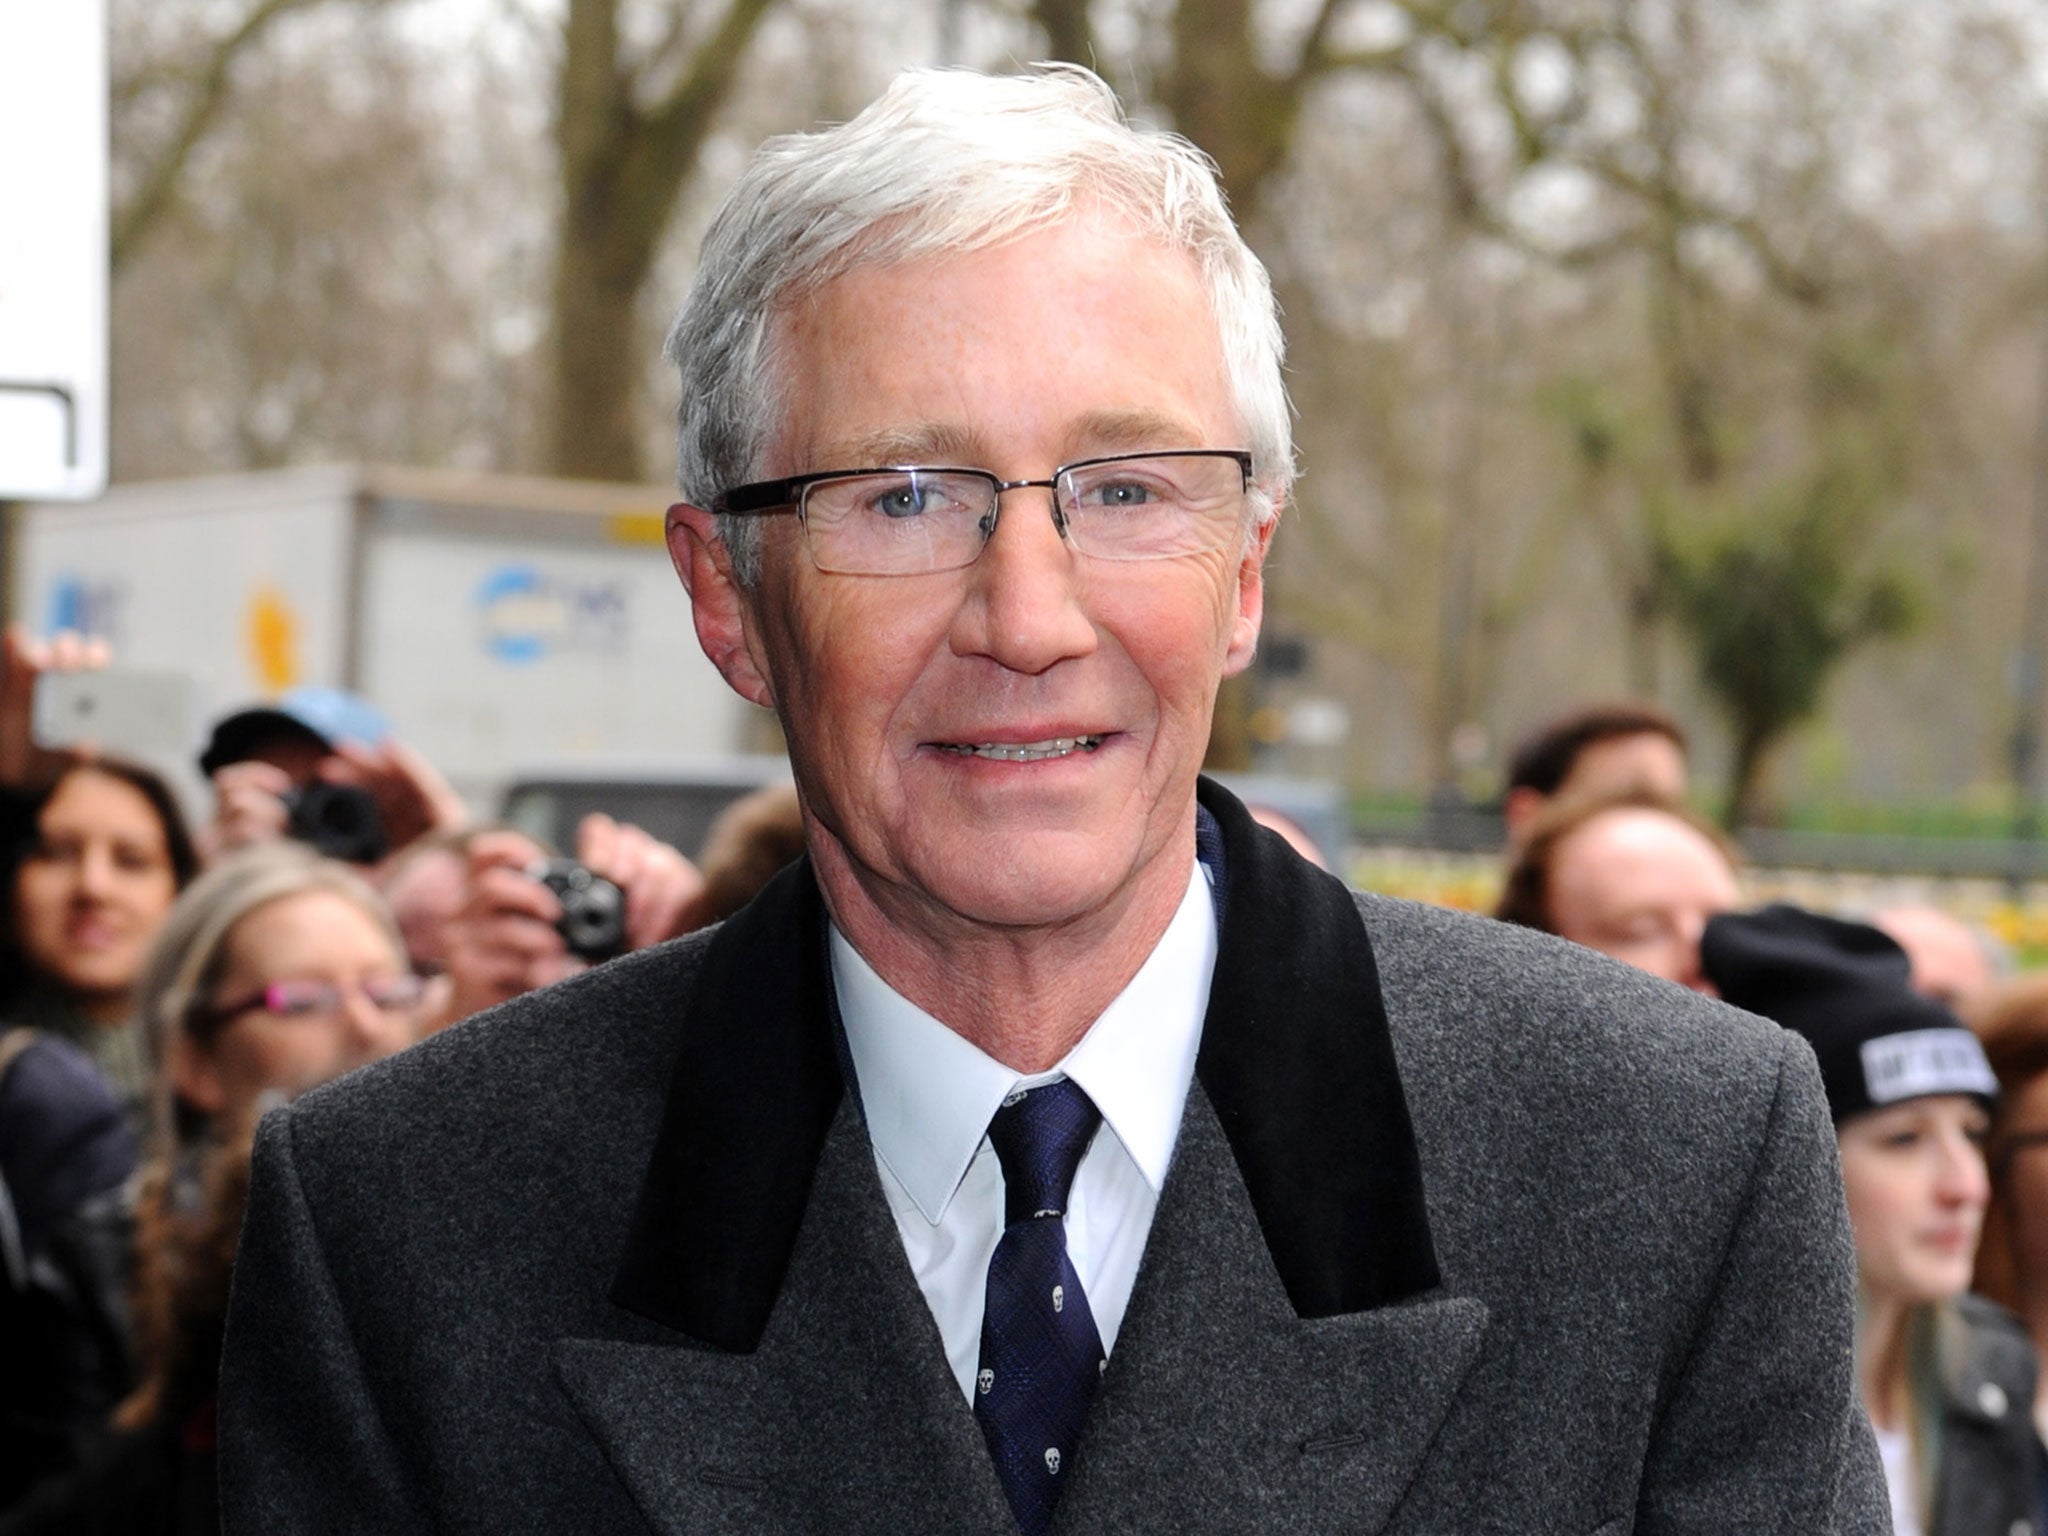 Paul O'Grady attends the 2014 TRIC Awards at The Grosvenor House Hotel on March 11, 2014 in London, England.